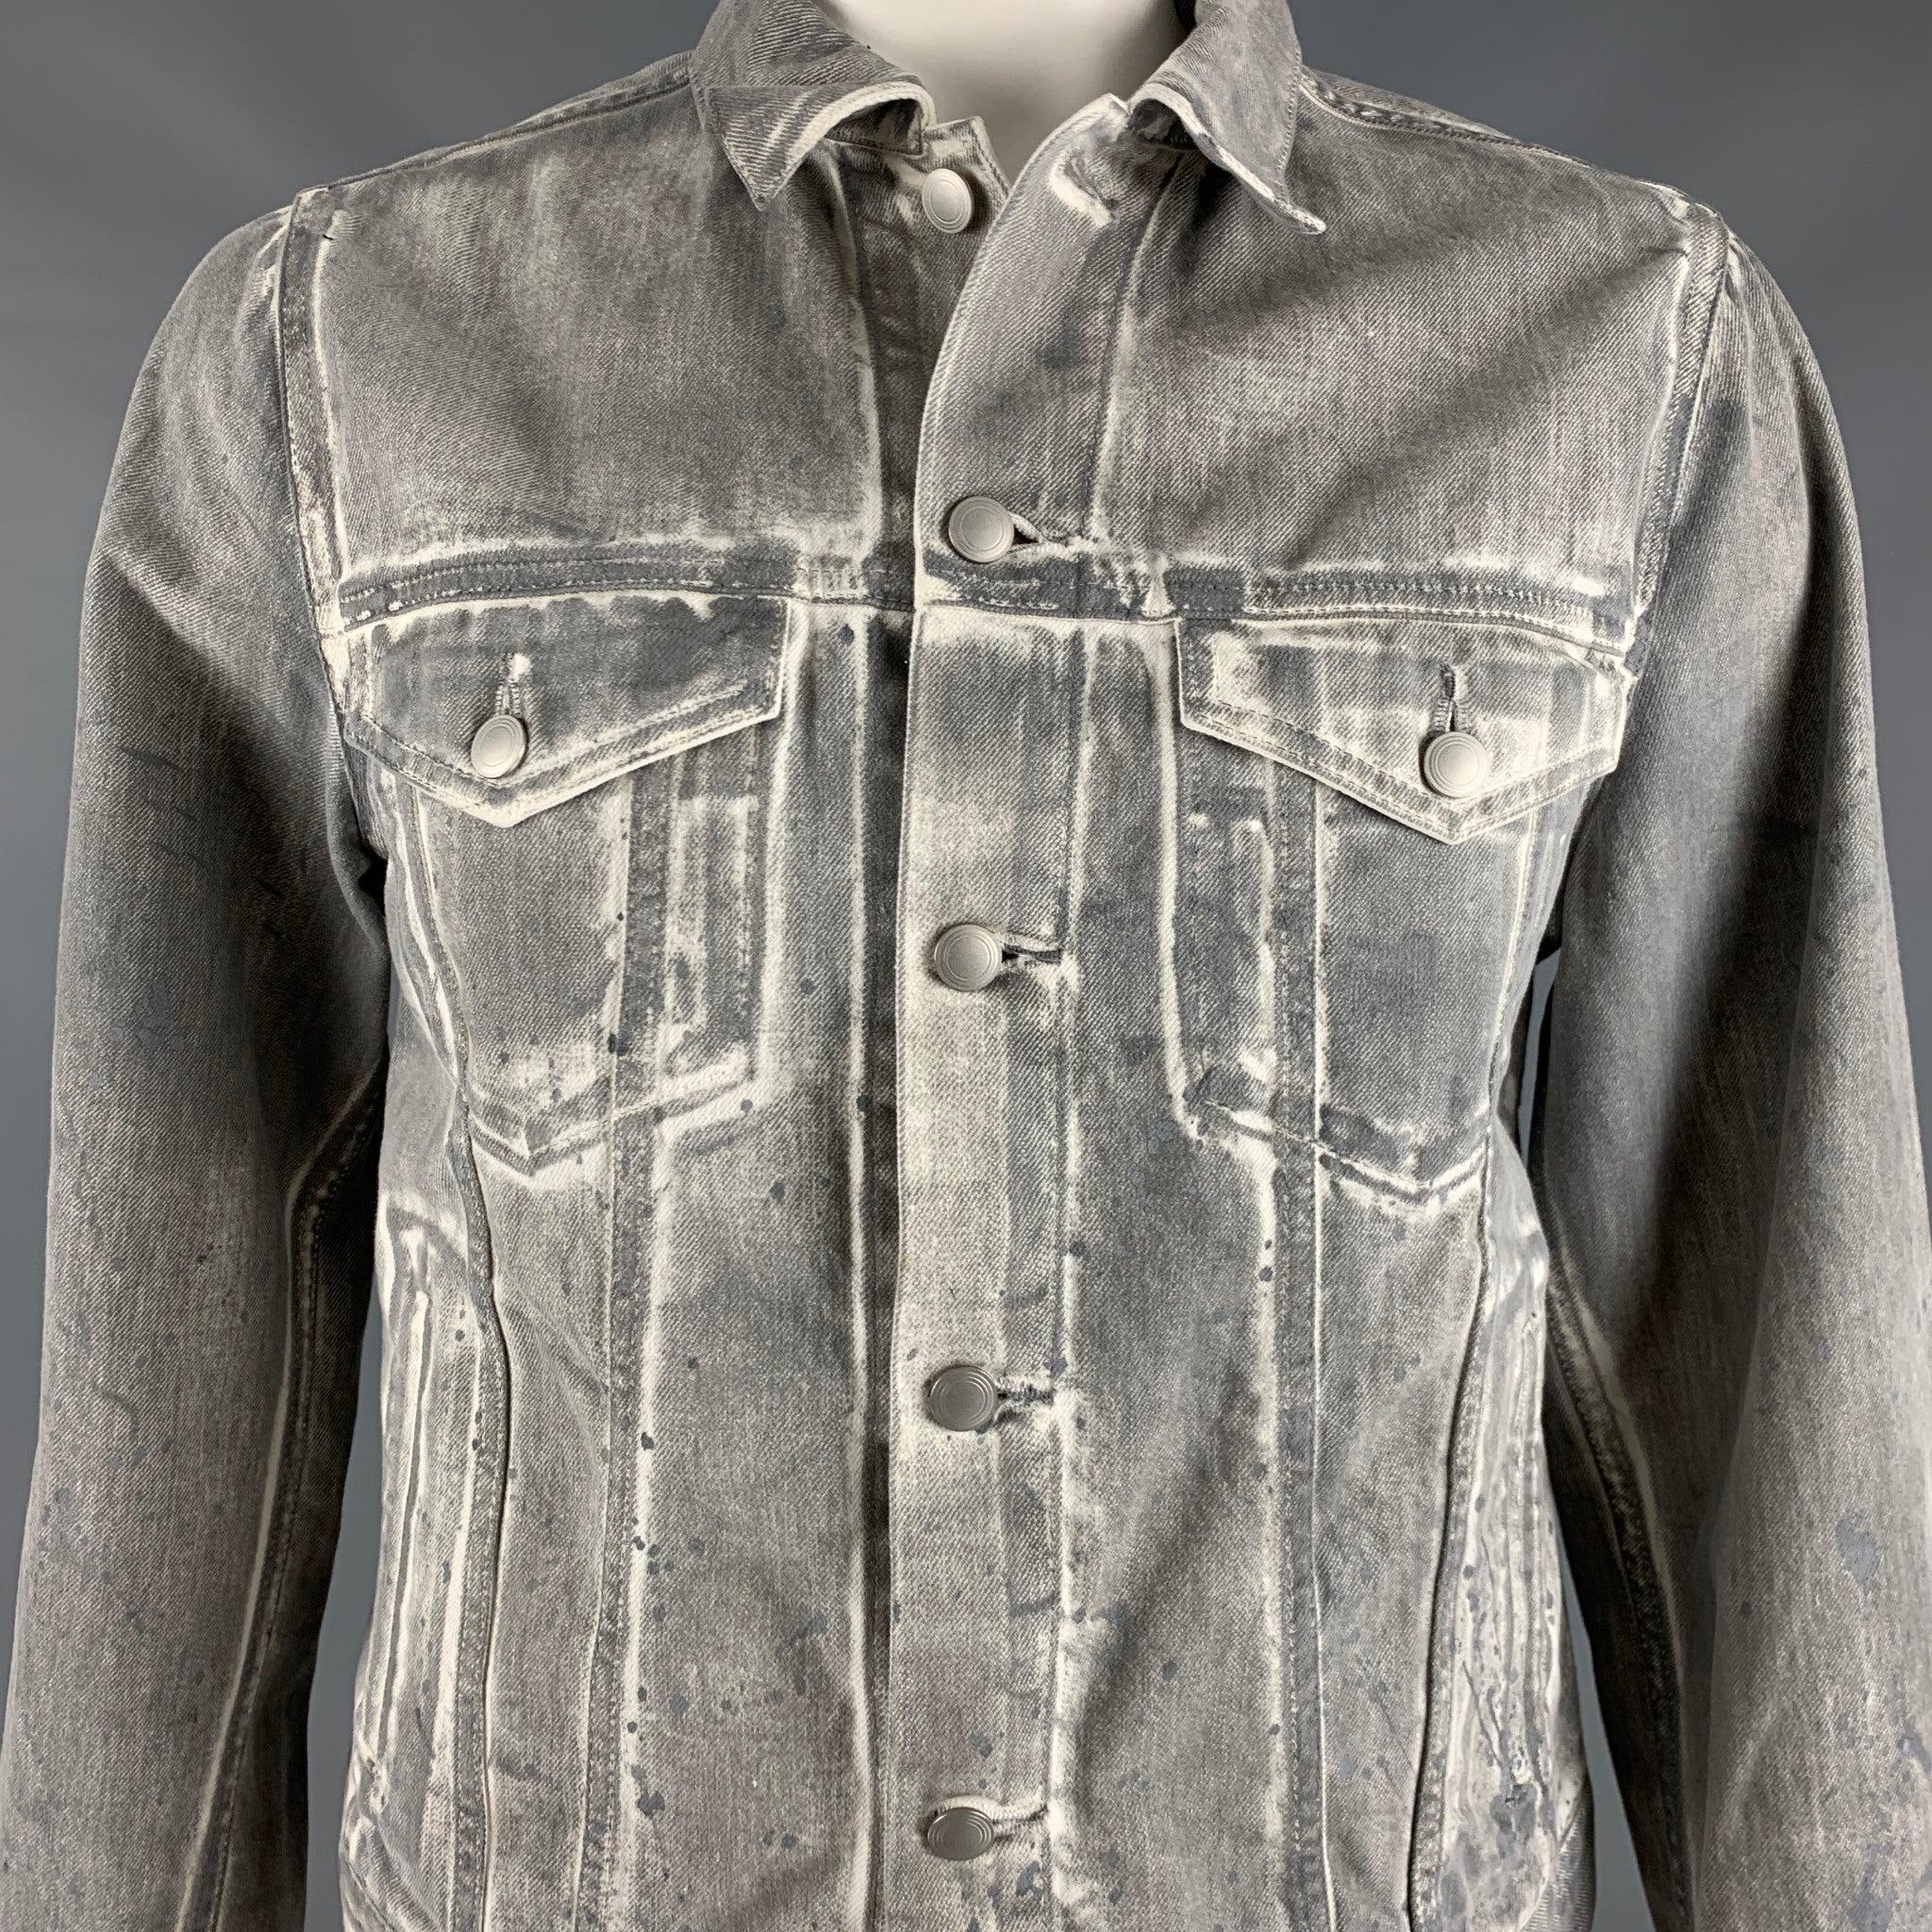 JOHN ELLIOT jacket
in a grey and white cotton featuring a painted trucker style, four pockets, and a button closure. Made in Japan.Excellent Pre-Owned Condition. 

Marked:   L 

Measurements: 
 
Shoulder: 16.5 inches Chest: 41 inches Sleeve: 26